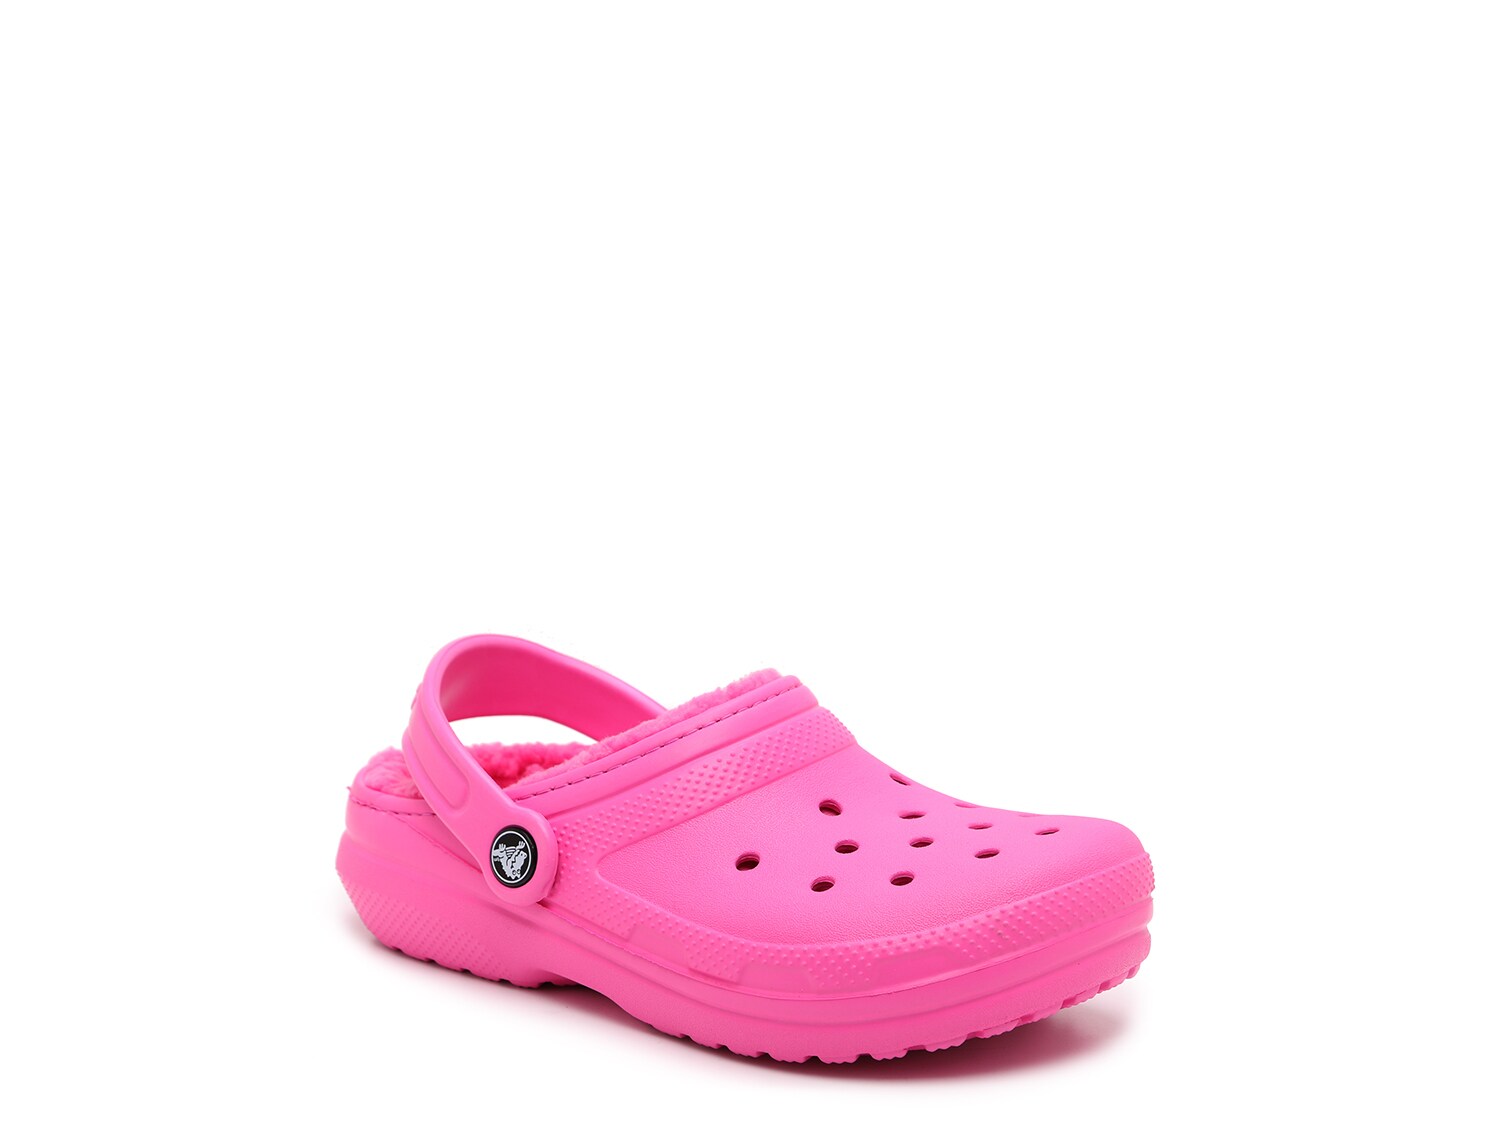 Crocs Classic Lined Clog - Kids' - Free Shipping | DSW